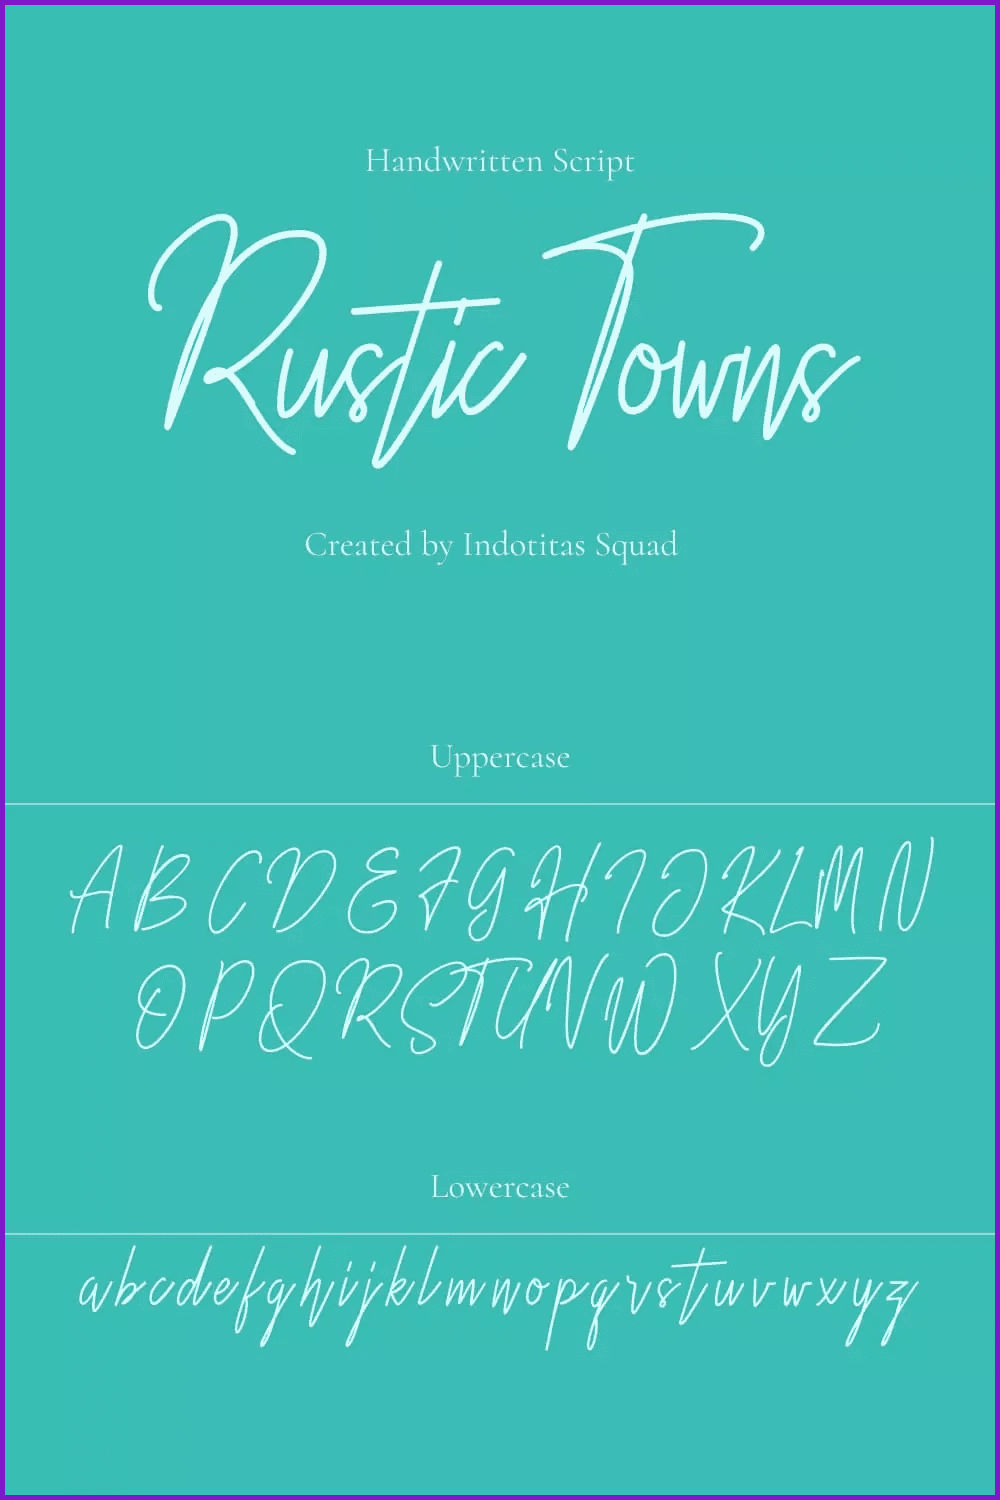 An example of a Rustic Towns Free Font on a green background.